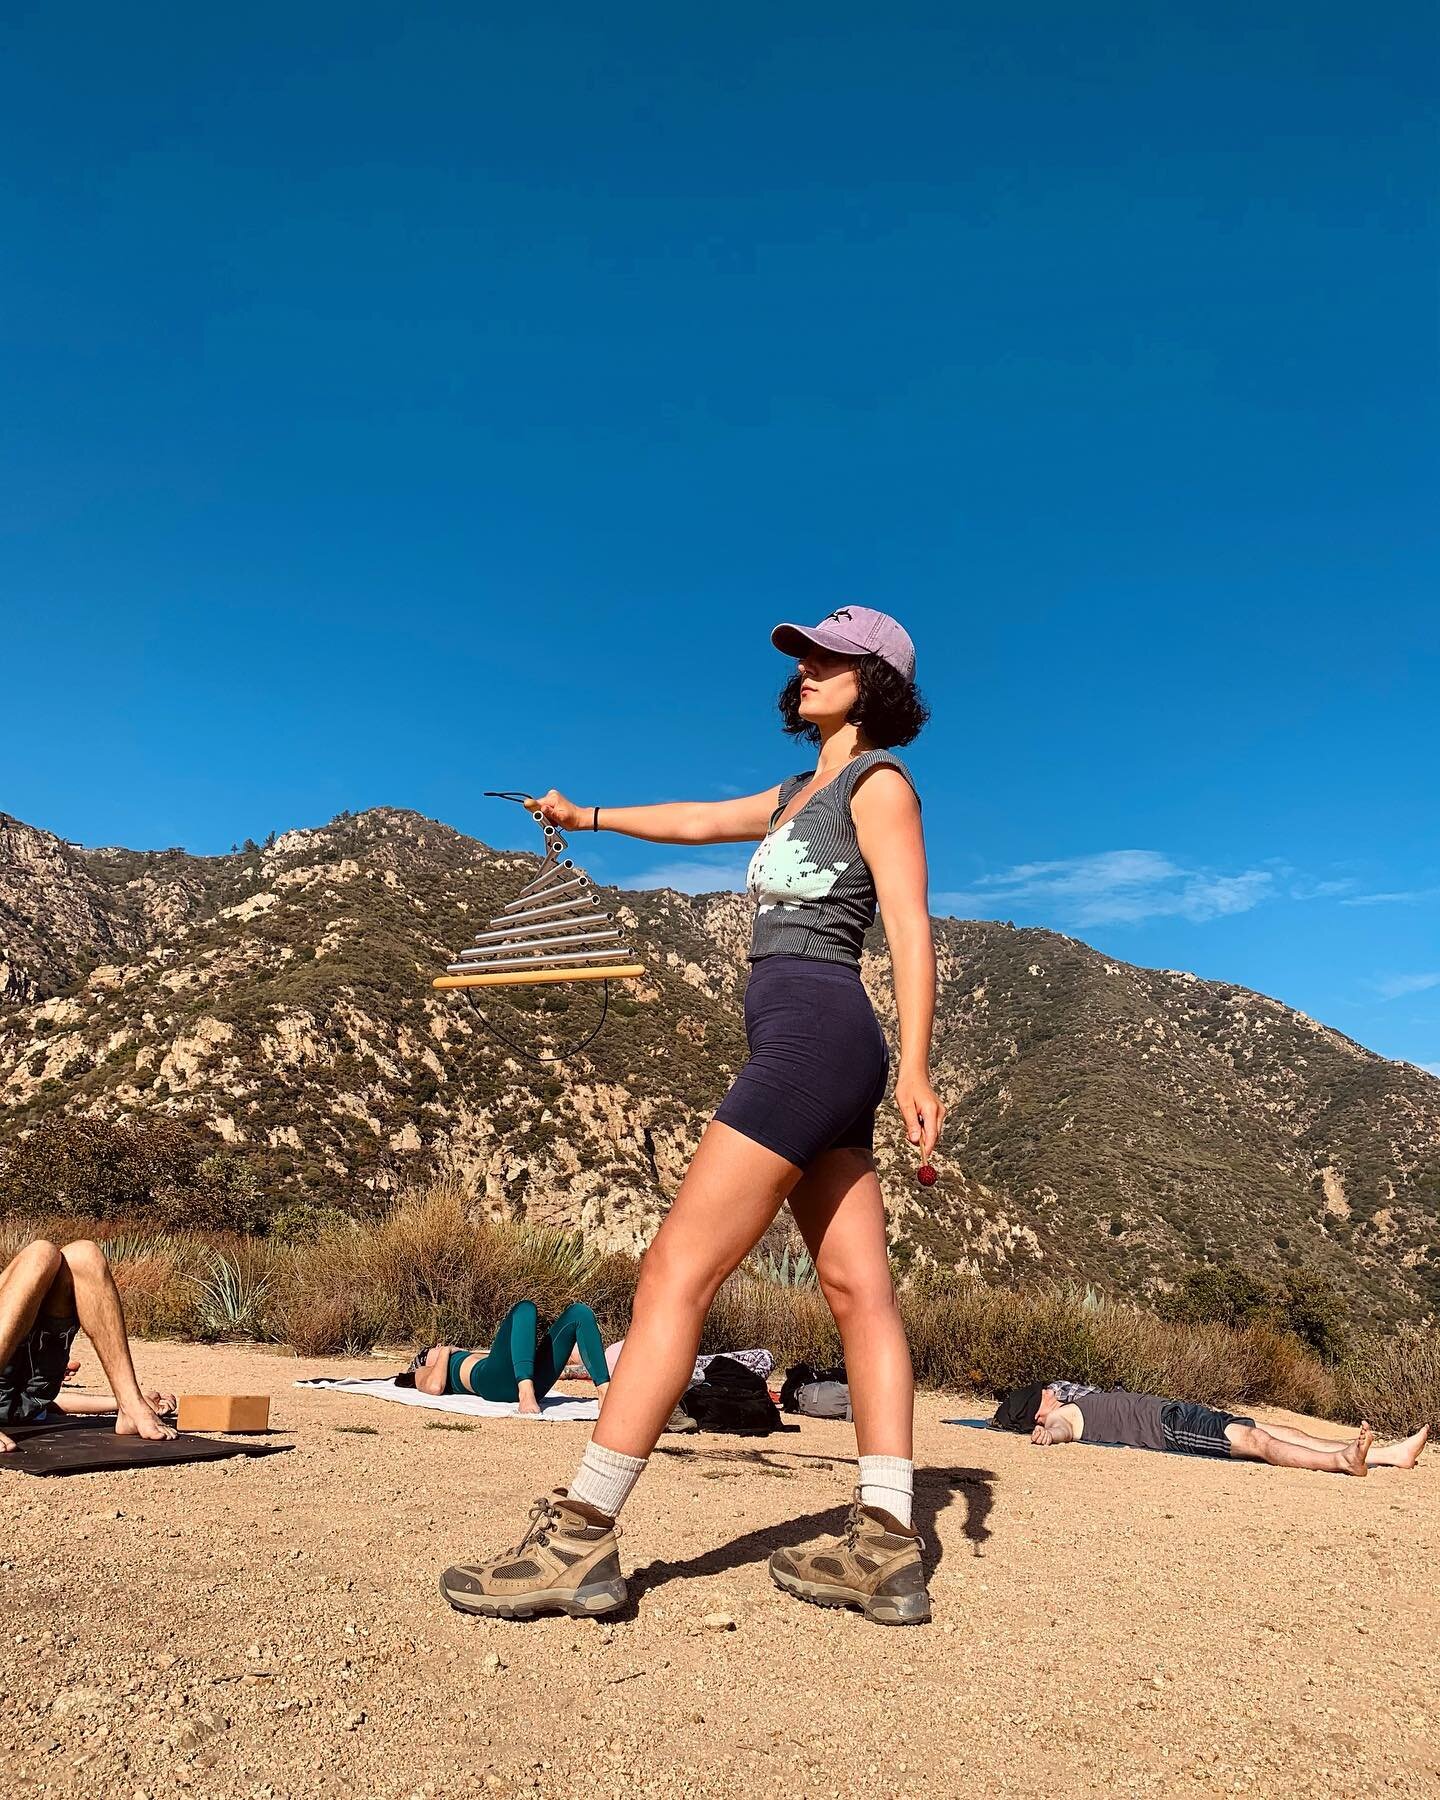 Hi 👋🏽
I&rsquo;m Amanda. You can find me in this embroidered Orca hat, swinging these chimes on a mountain top every month with @yogahikela 🥾🥾🥾
Yoga Hike LA is one of my many offerings (co created w/ @alexhalenda) and I hate to choose favorites b